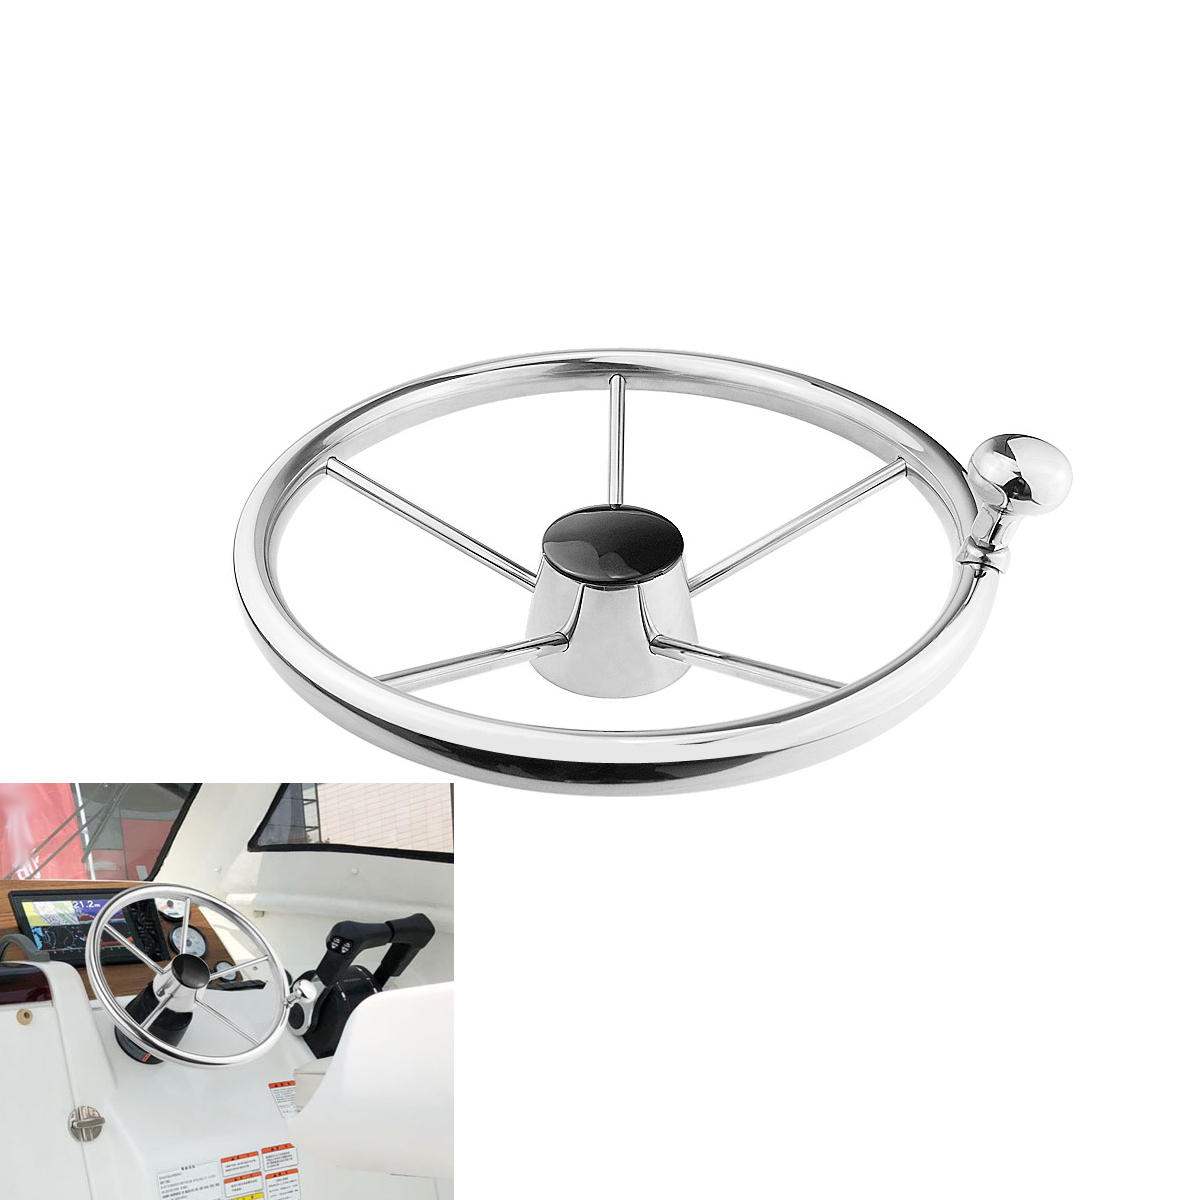 13-1//2/" Boat Marine Stainless Steel 3 Spoke Steering Wheel With Knob Top Quality